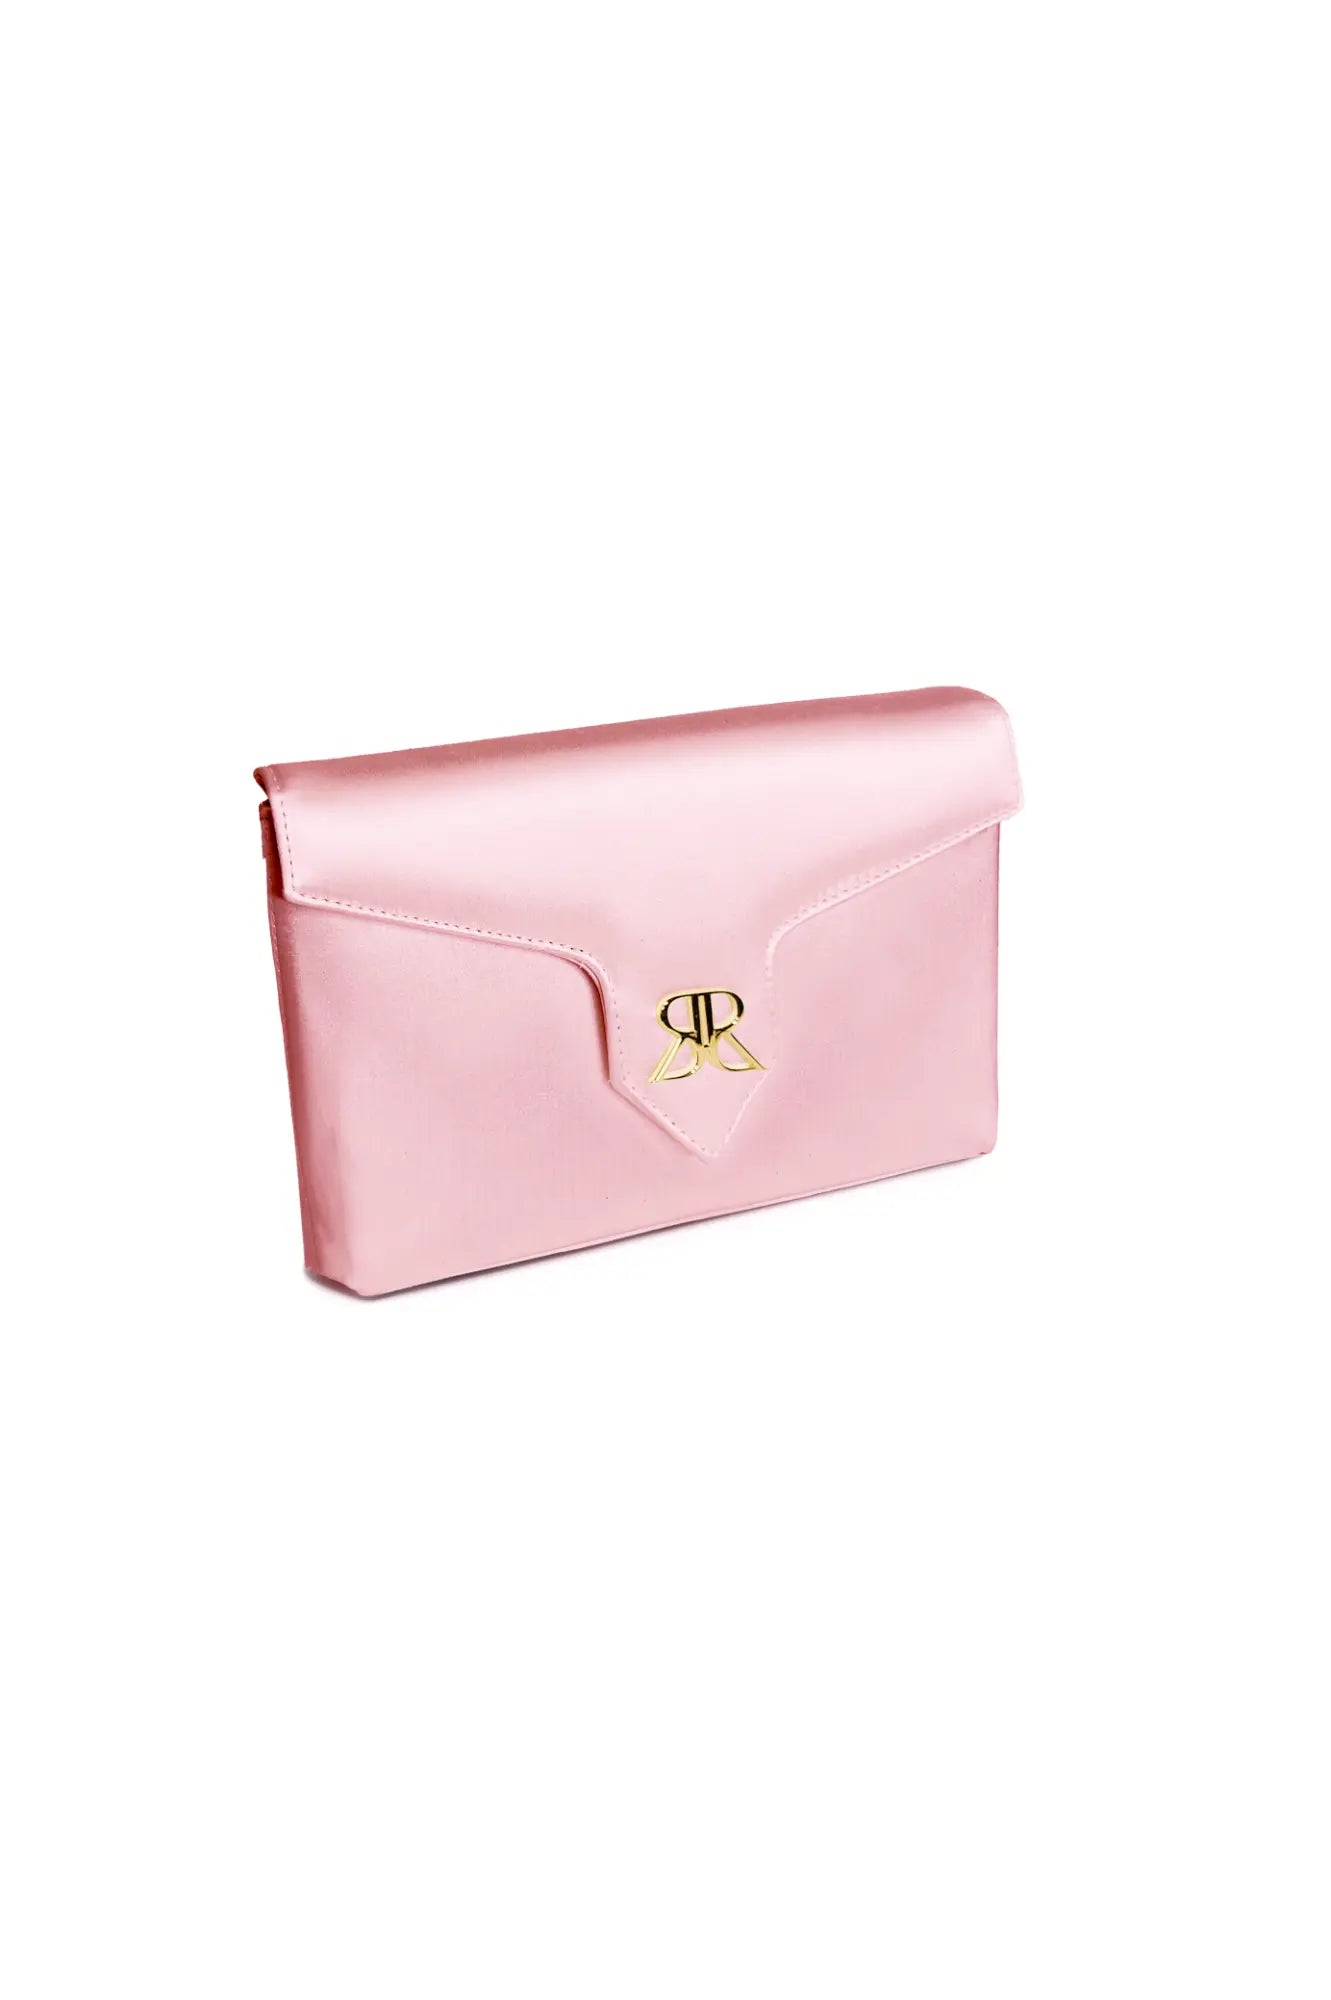 Love Note Envelope Clutch Pink Sky by The Bella Rosa Collection with a gold clasp against a white background.